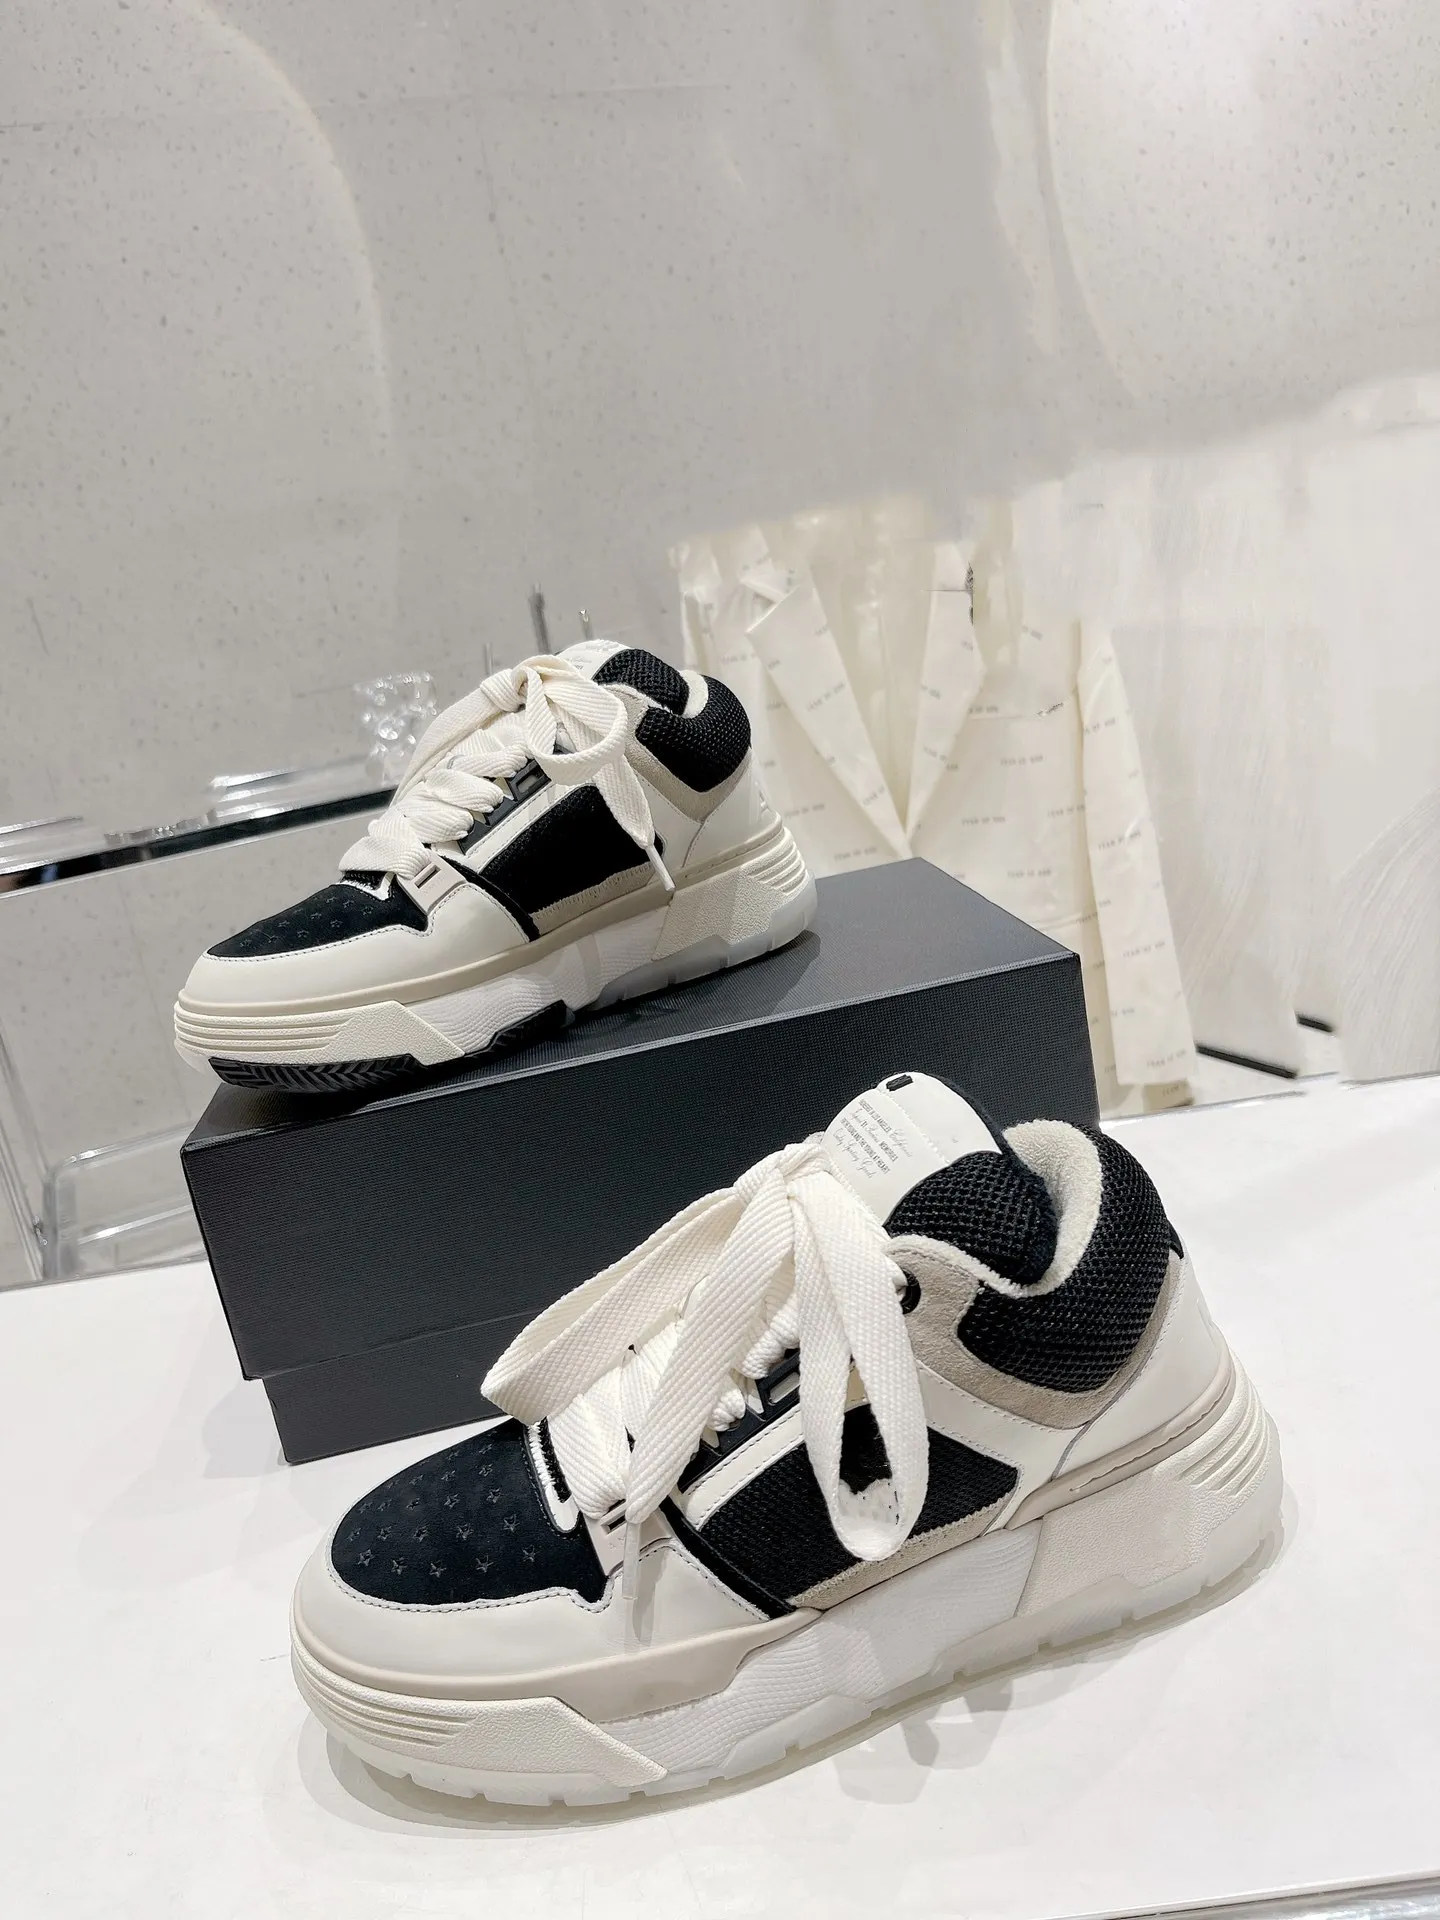 Dior B23 Oblique Low High Top Sneakers With Wholesale Cheap Price | High  tops, High top sneakers, Dior